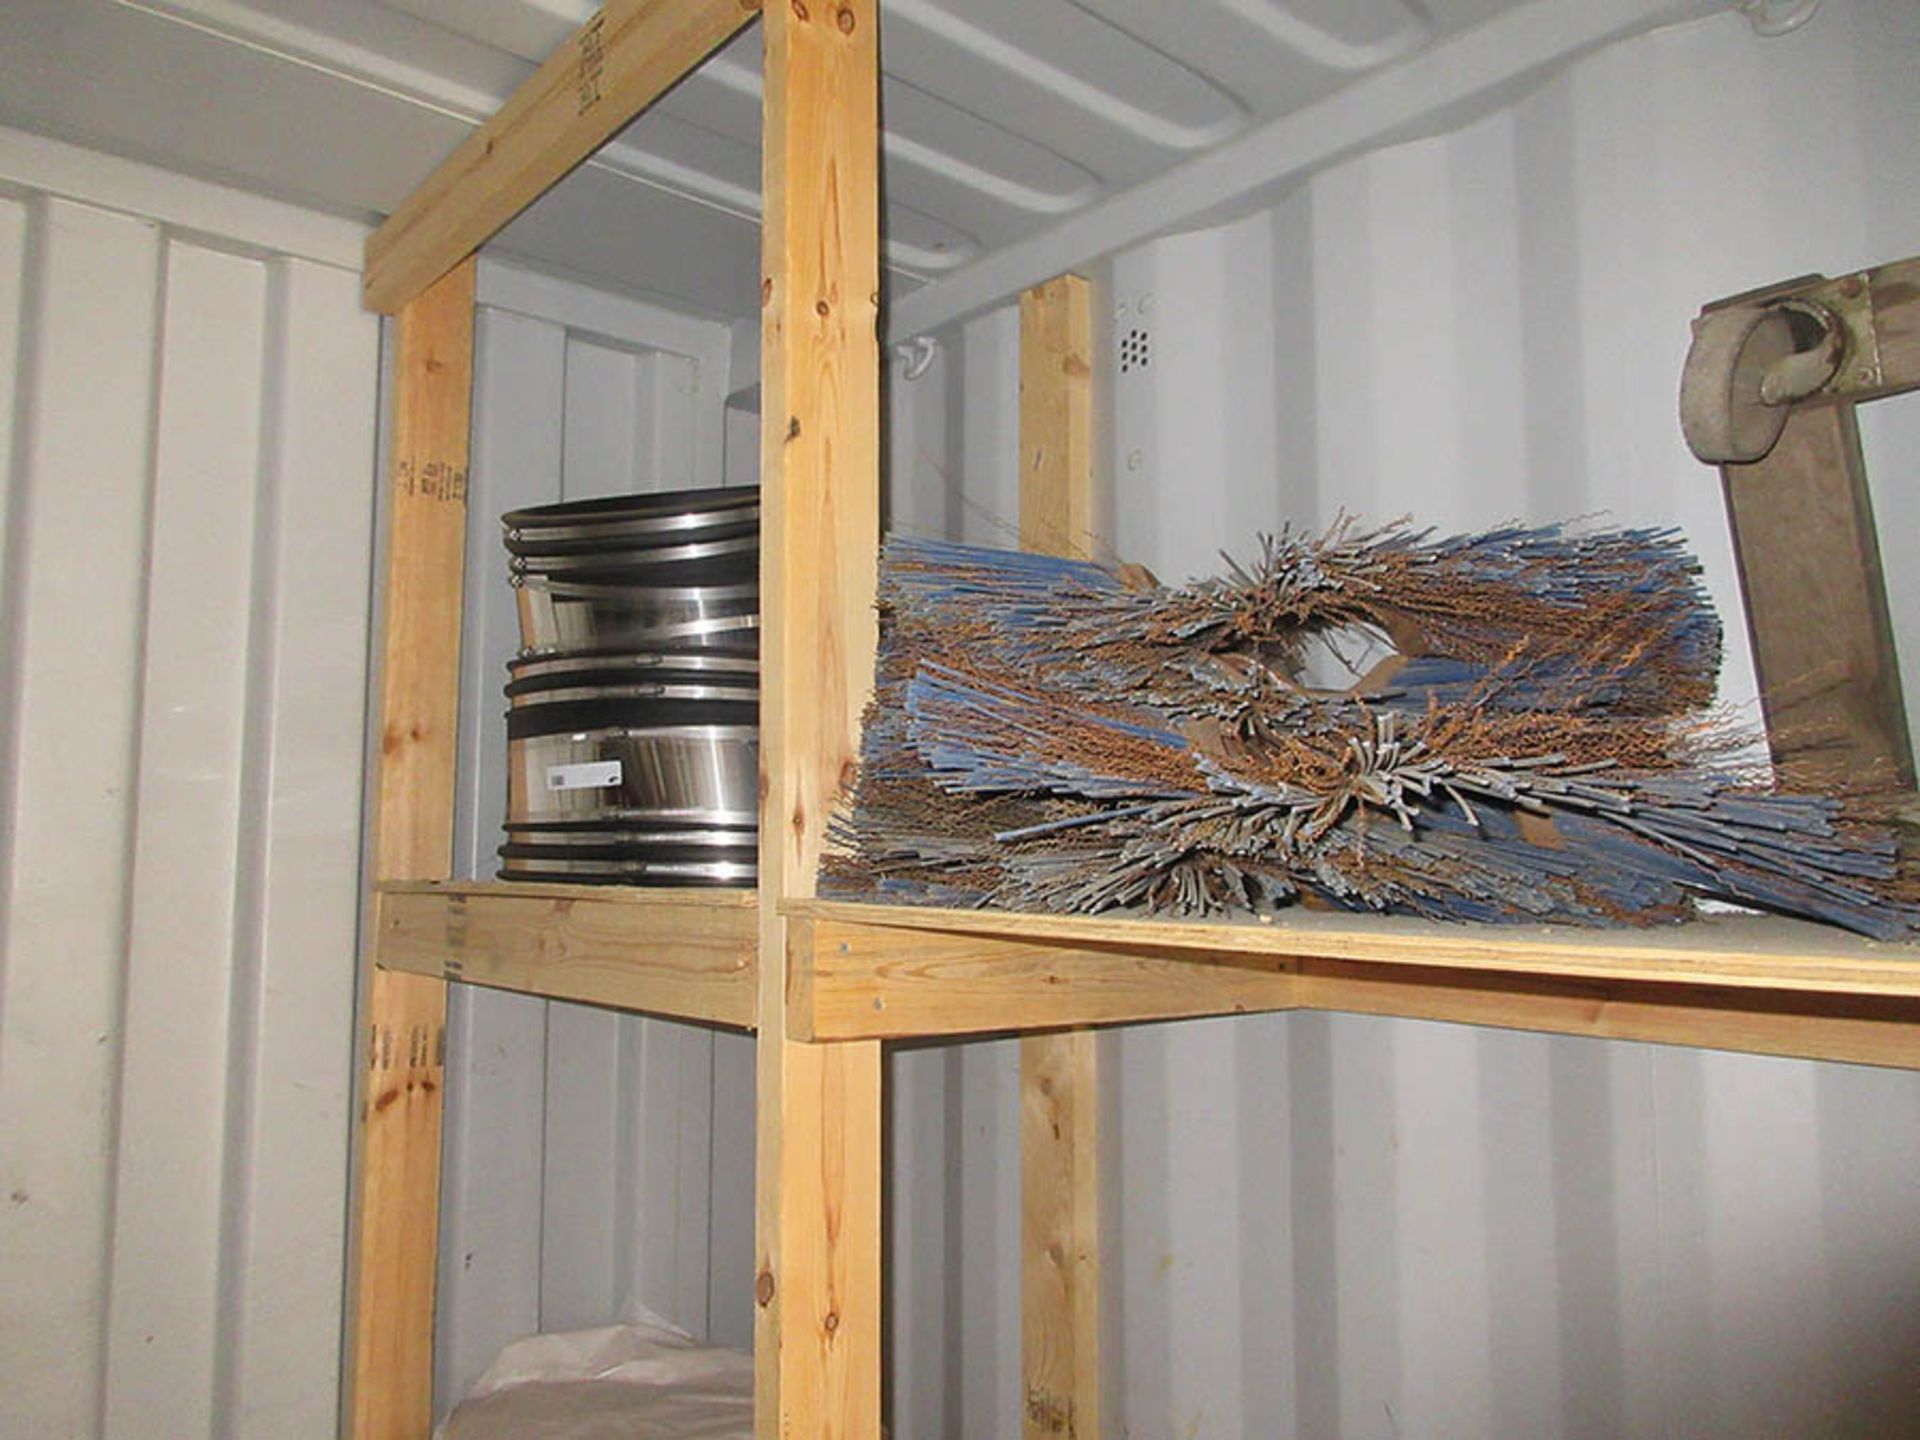 CONTENTS OF CONTAINER - ASSORTED DISCHARGE HOSE, TORCH HOSES, DRILL, AND FISH TAPE SPOOL - Image 7 of 10